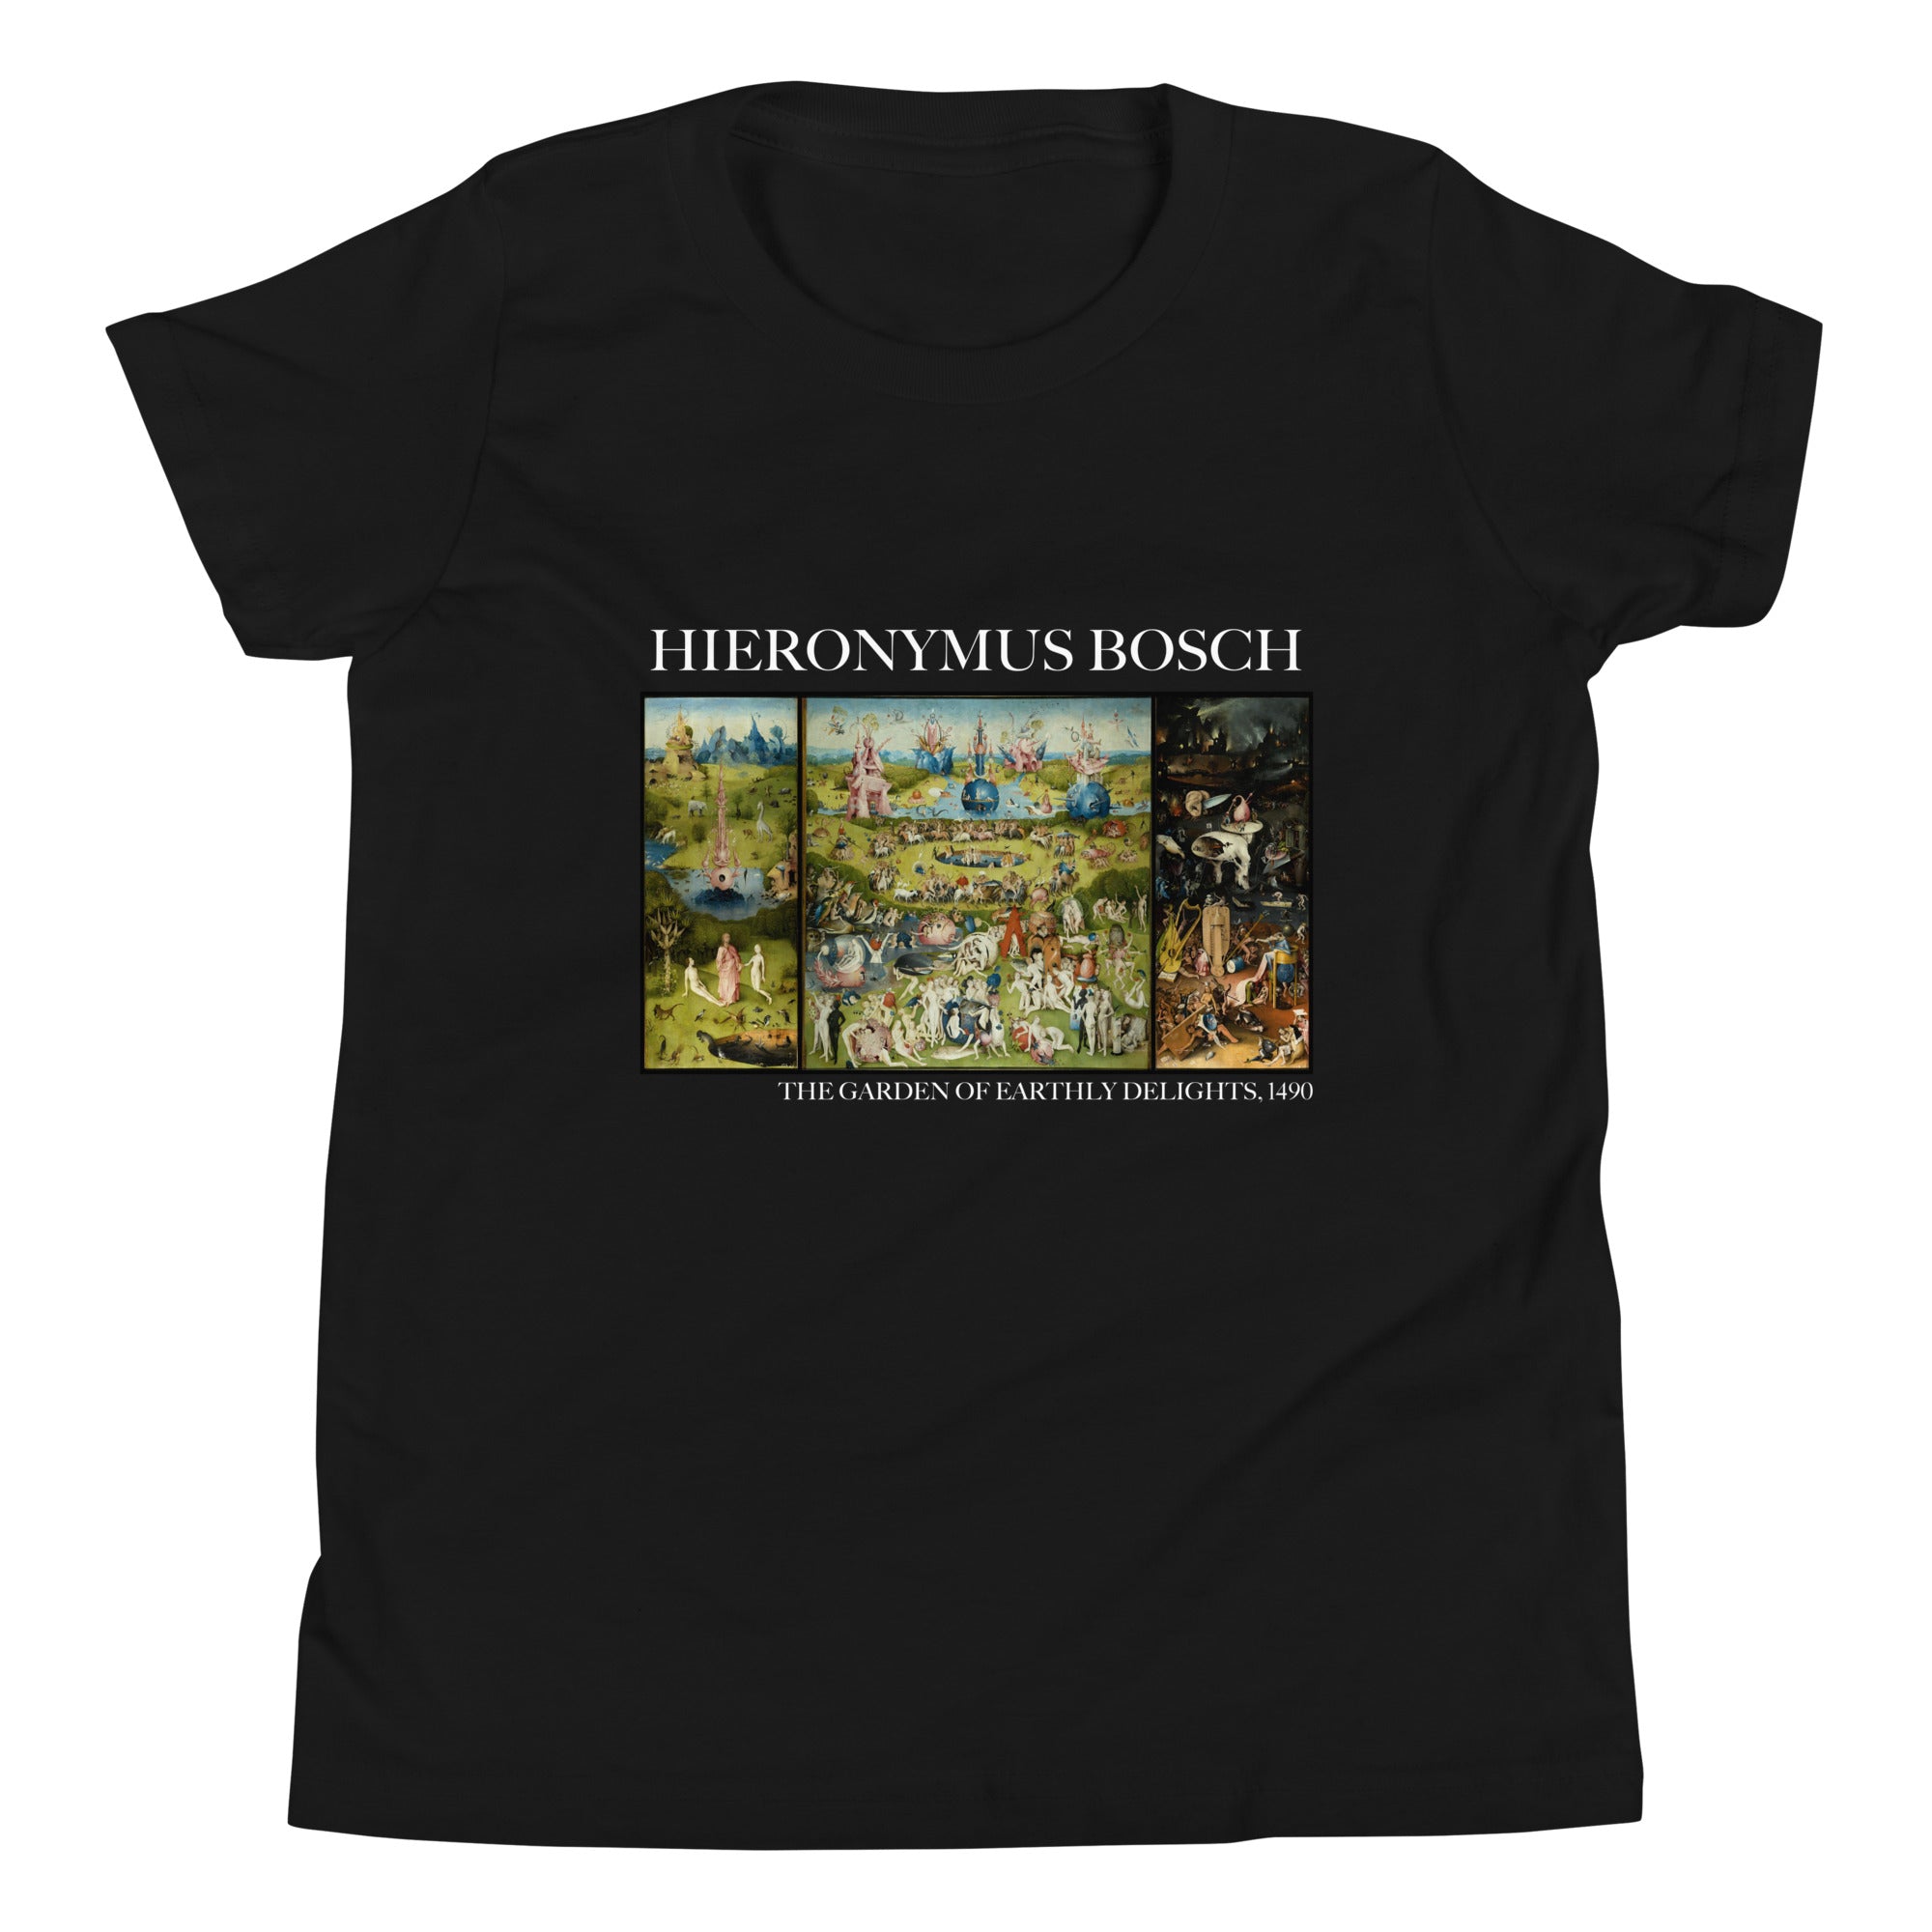 Hieronymus Bosch 'The Garden of Earthly Delights' Famous Painting Short Sleeve T-Shirt | Premium Youth Art Tee